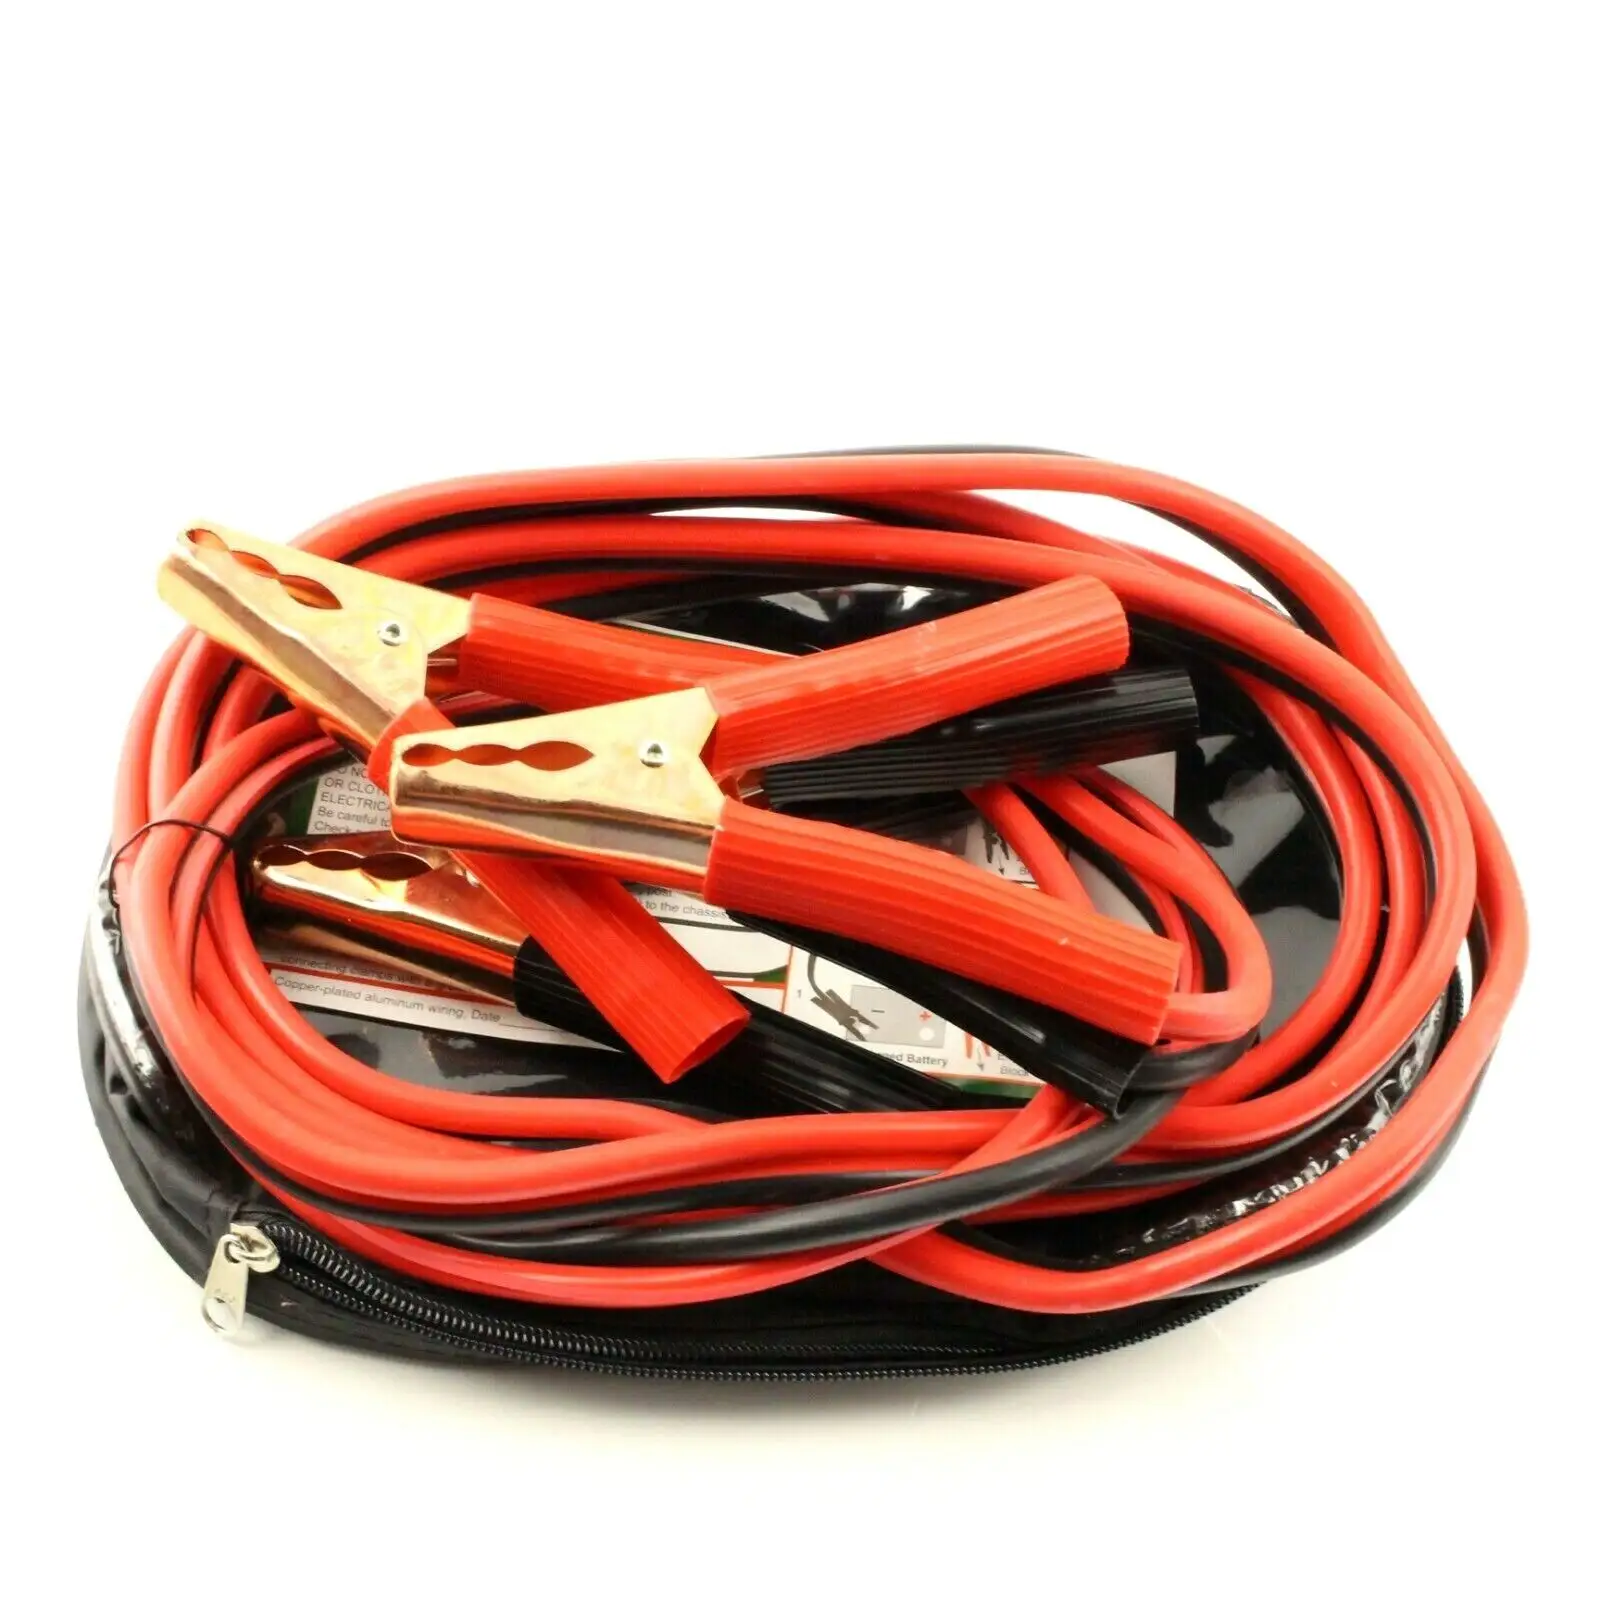 power jumper cable 2.5m or customized jumper leads booster cable car vehicle good quality jump leads